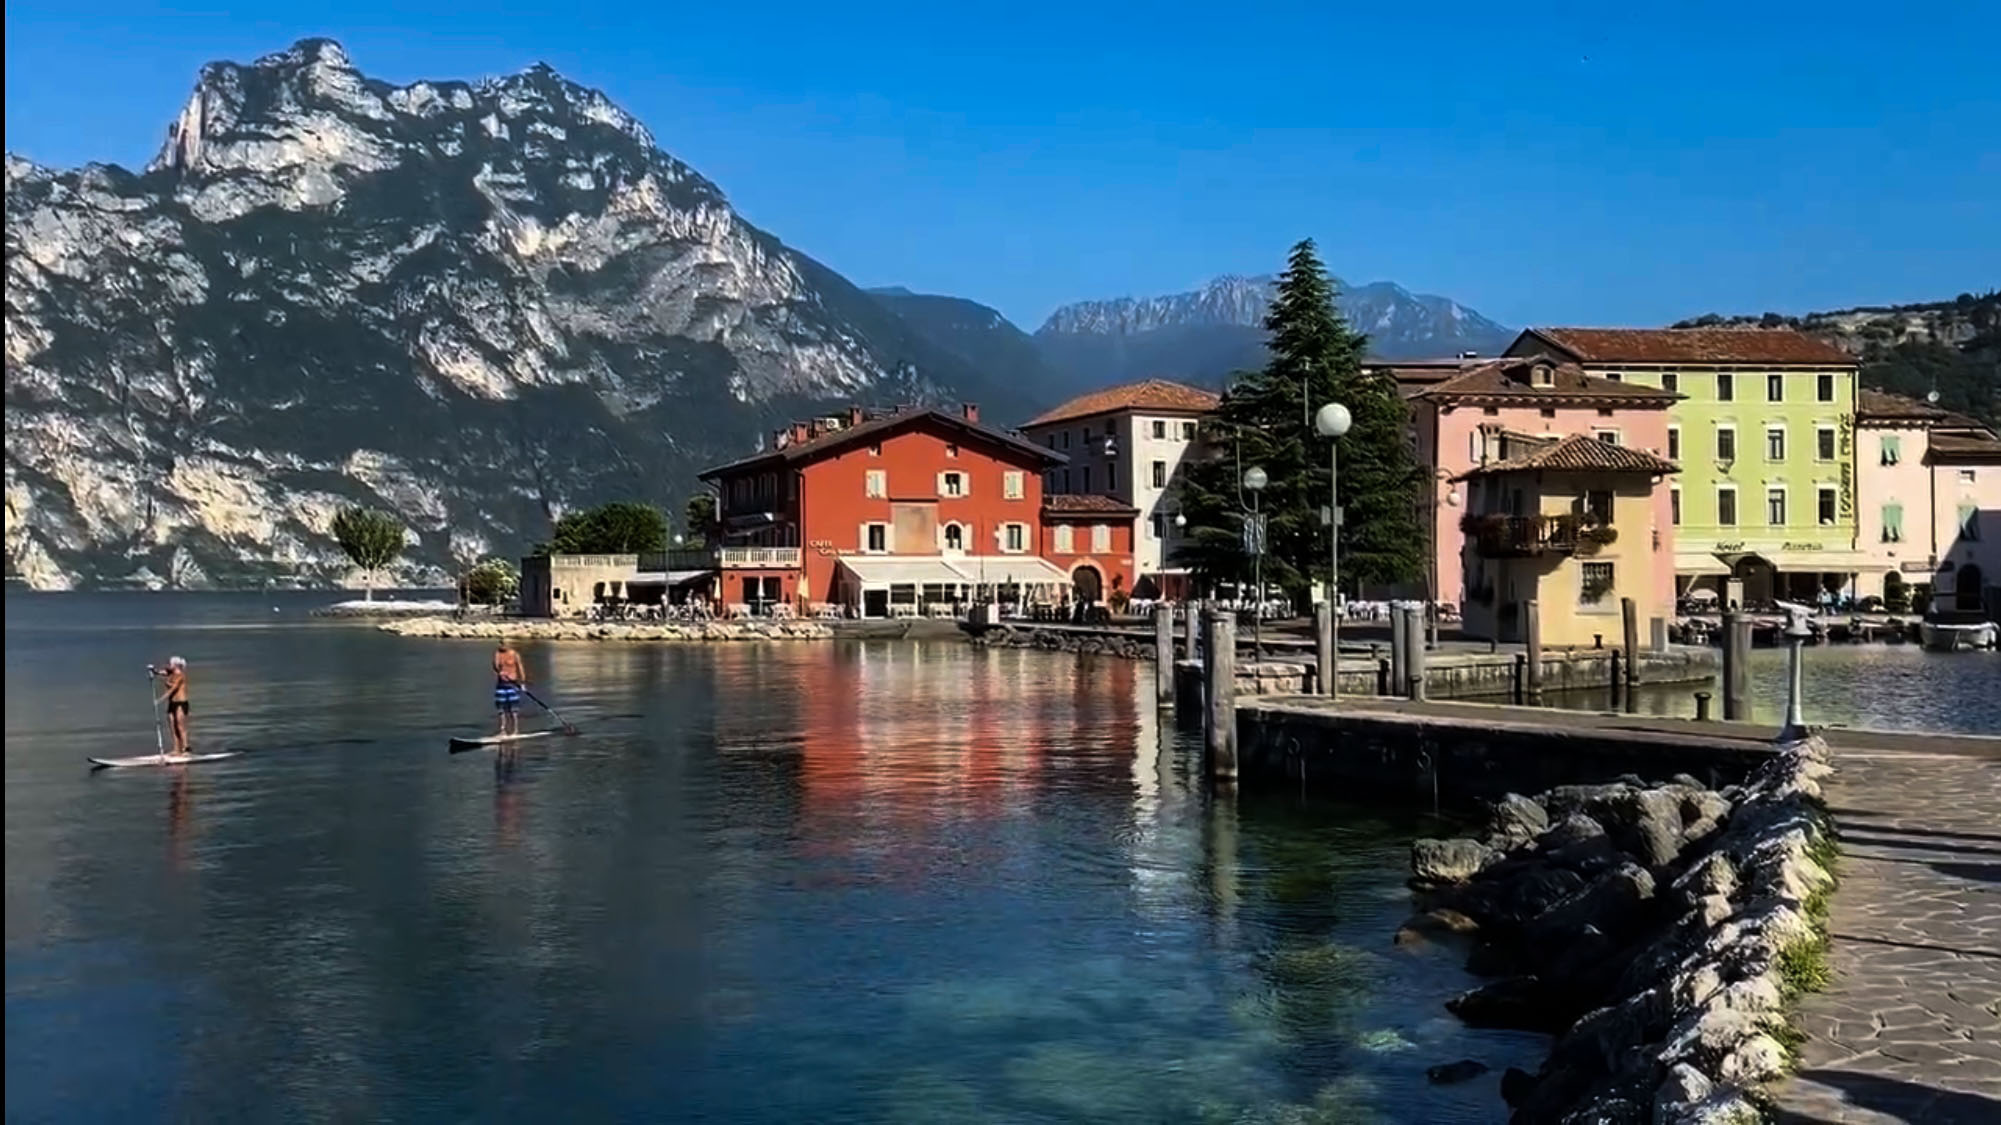 STAND UP PADDLE – SUP GARDASEE IN TRENTINO